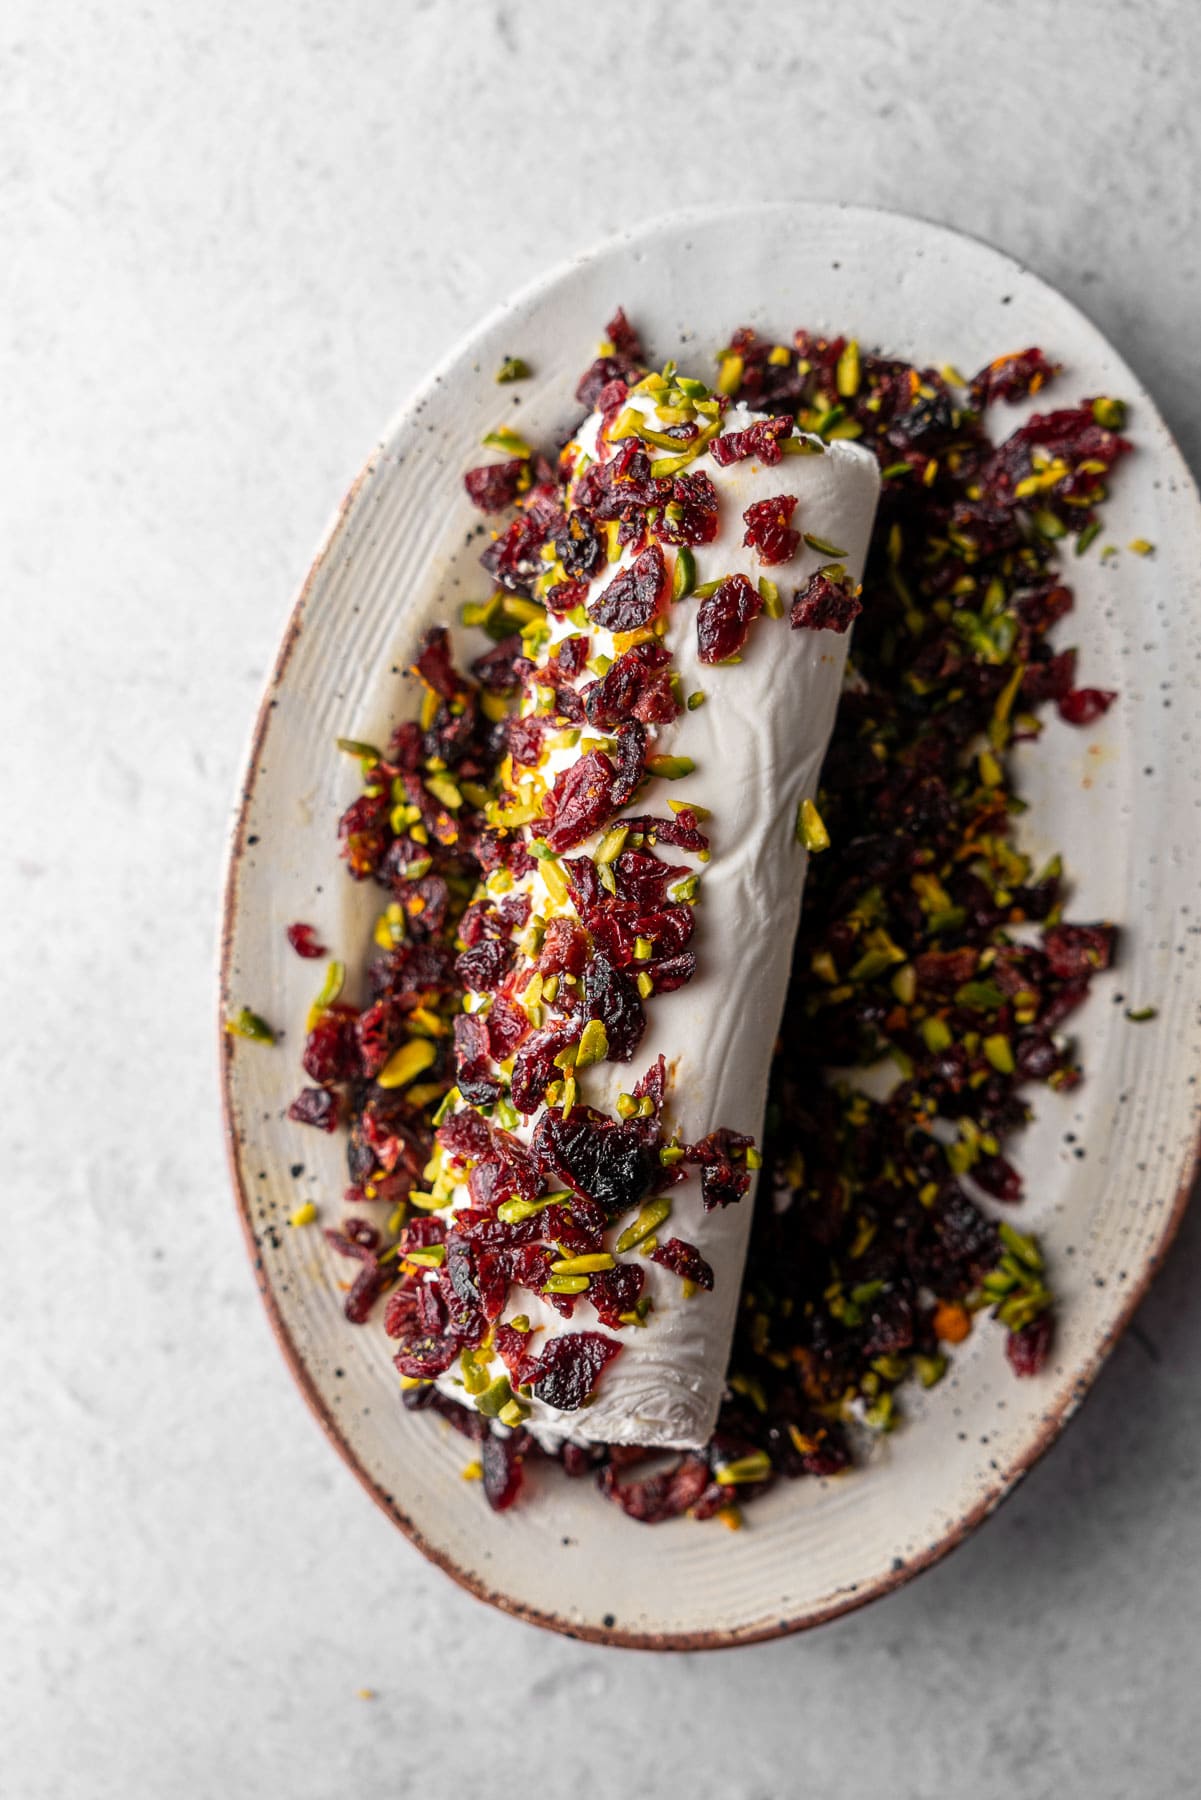 A goat cheese log half rolled in chopped cranberries and pistachios.